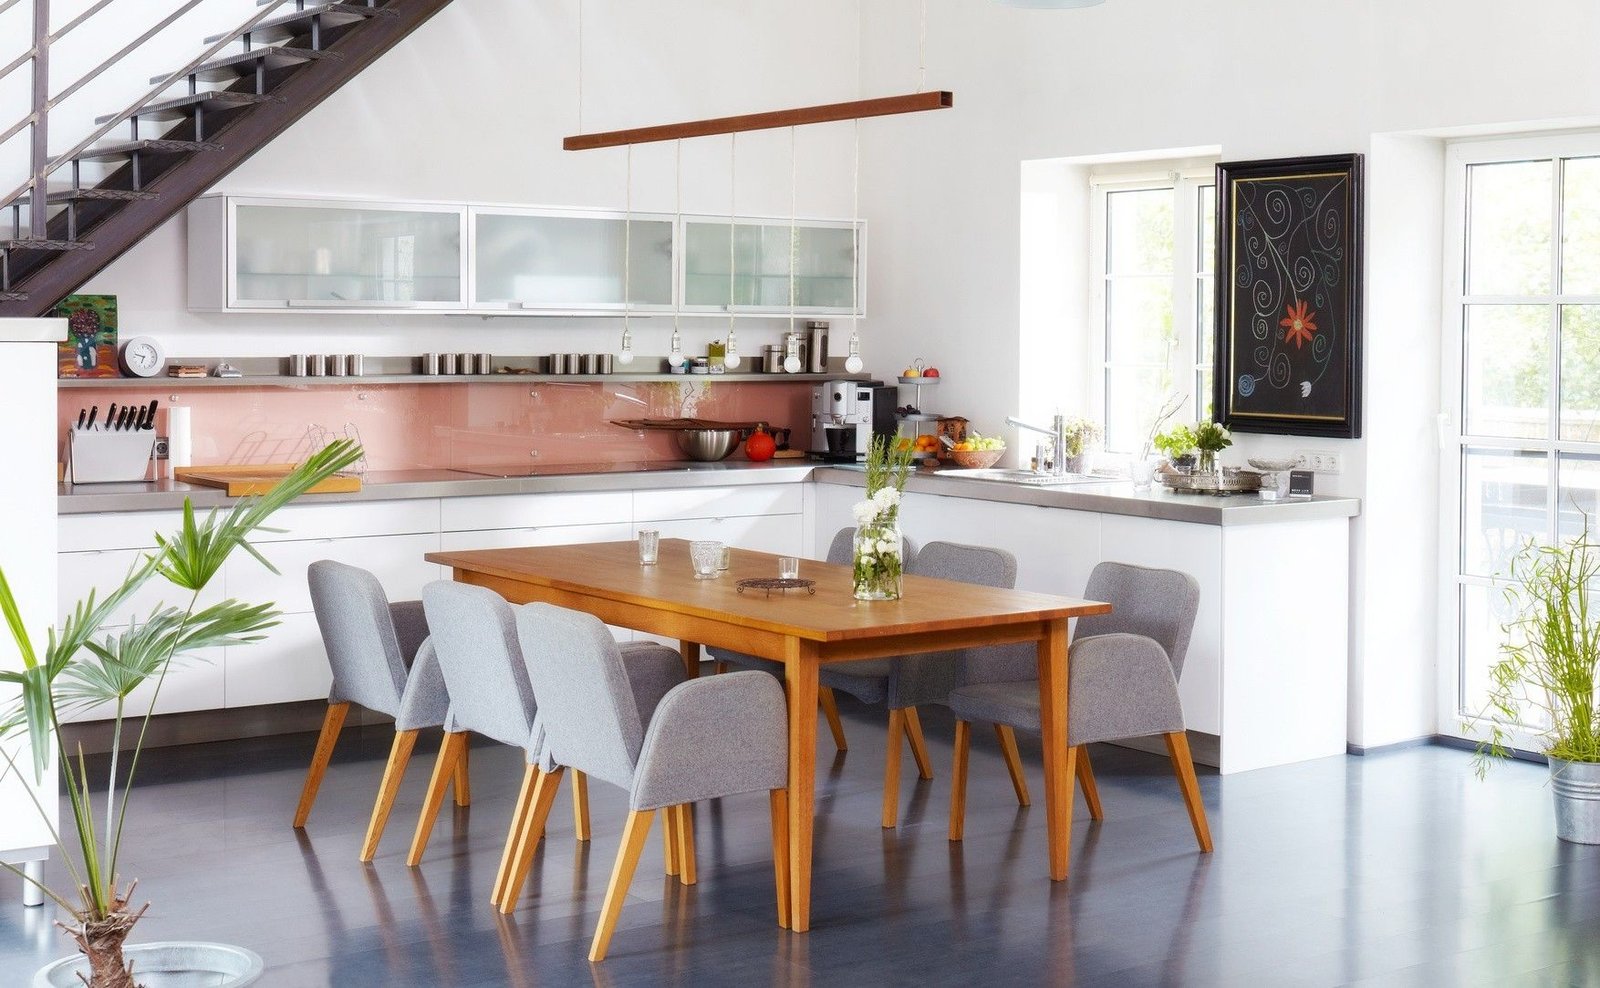 An open kitchen combines cooking and eating living and